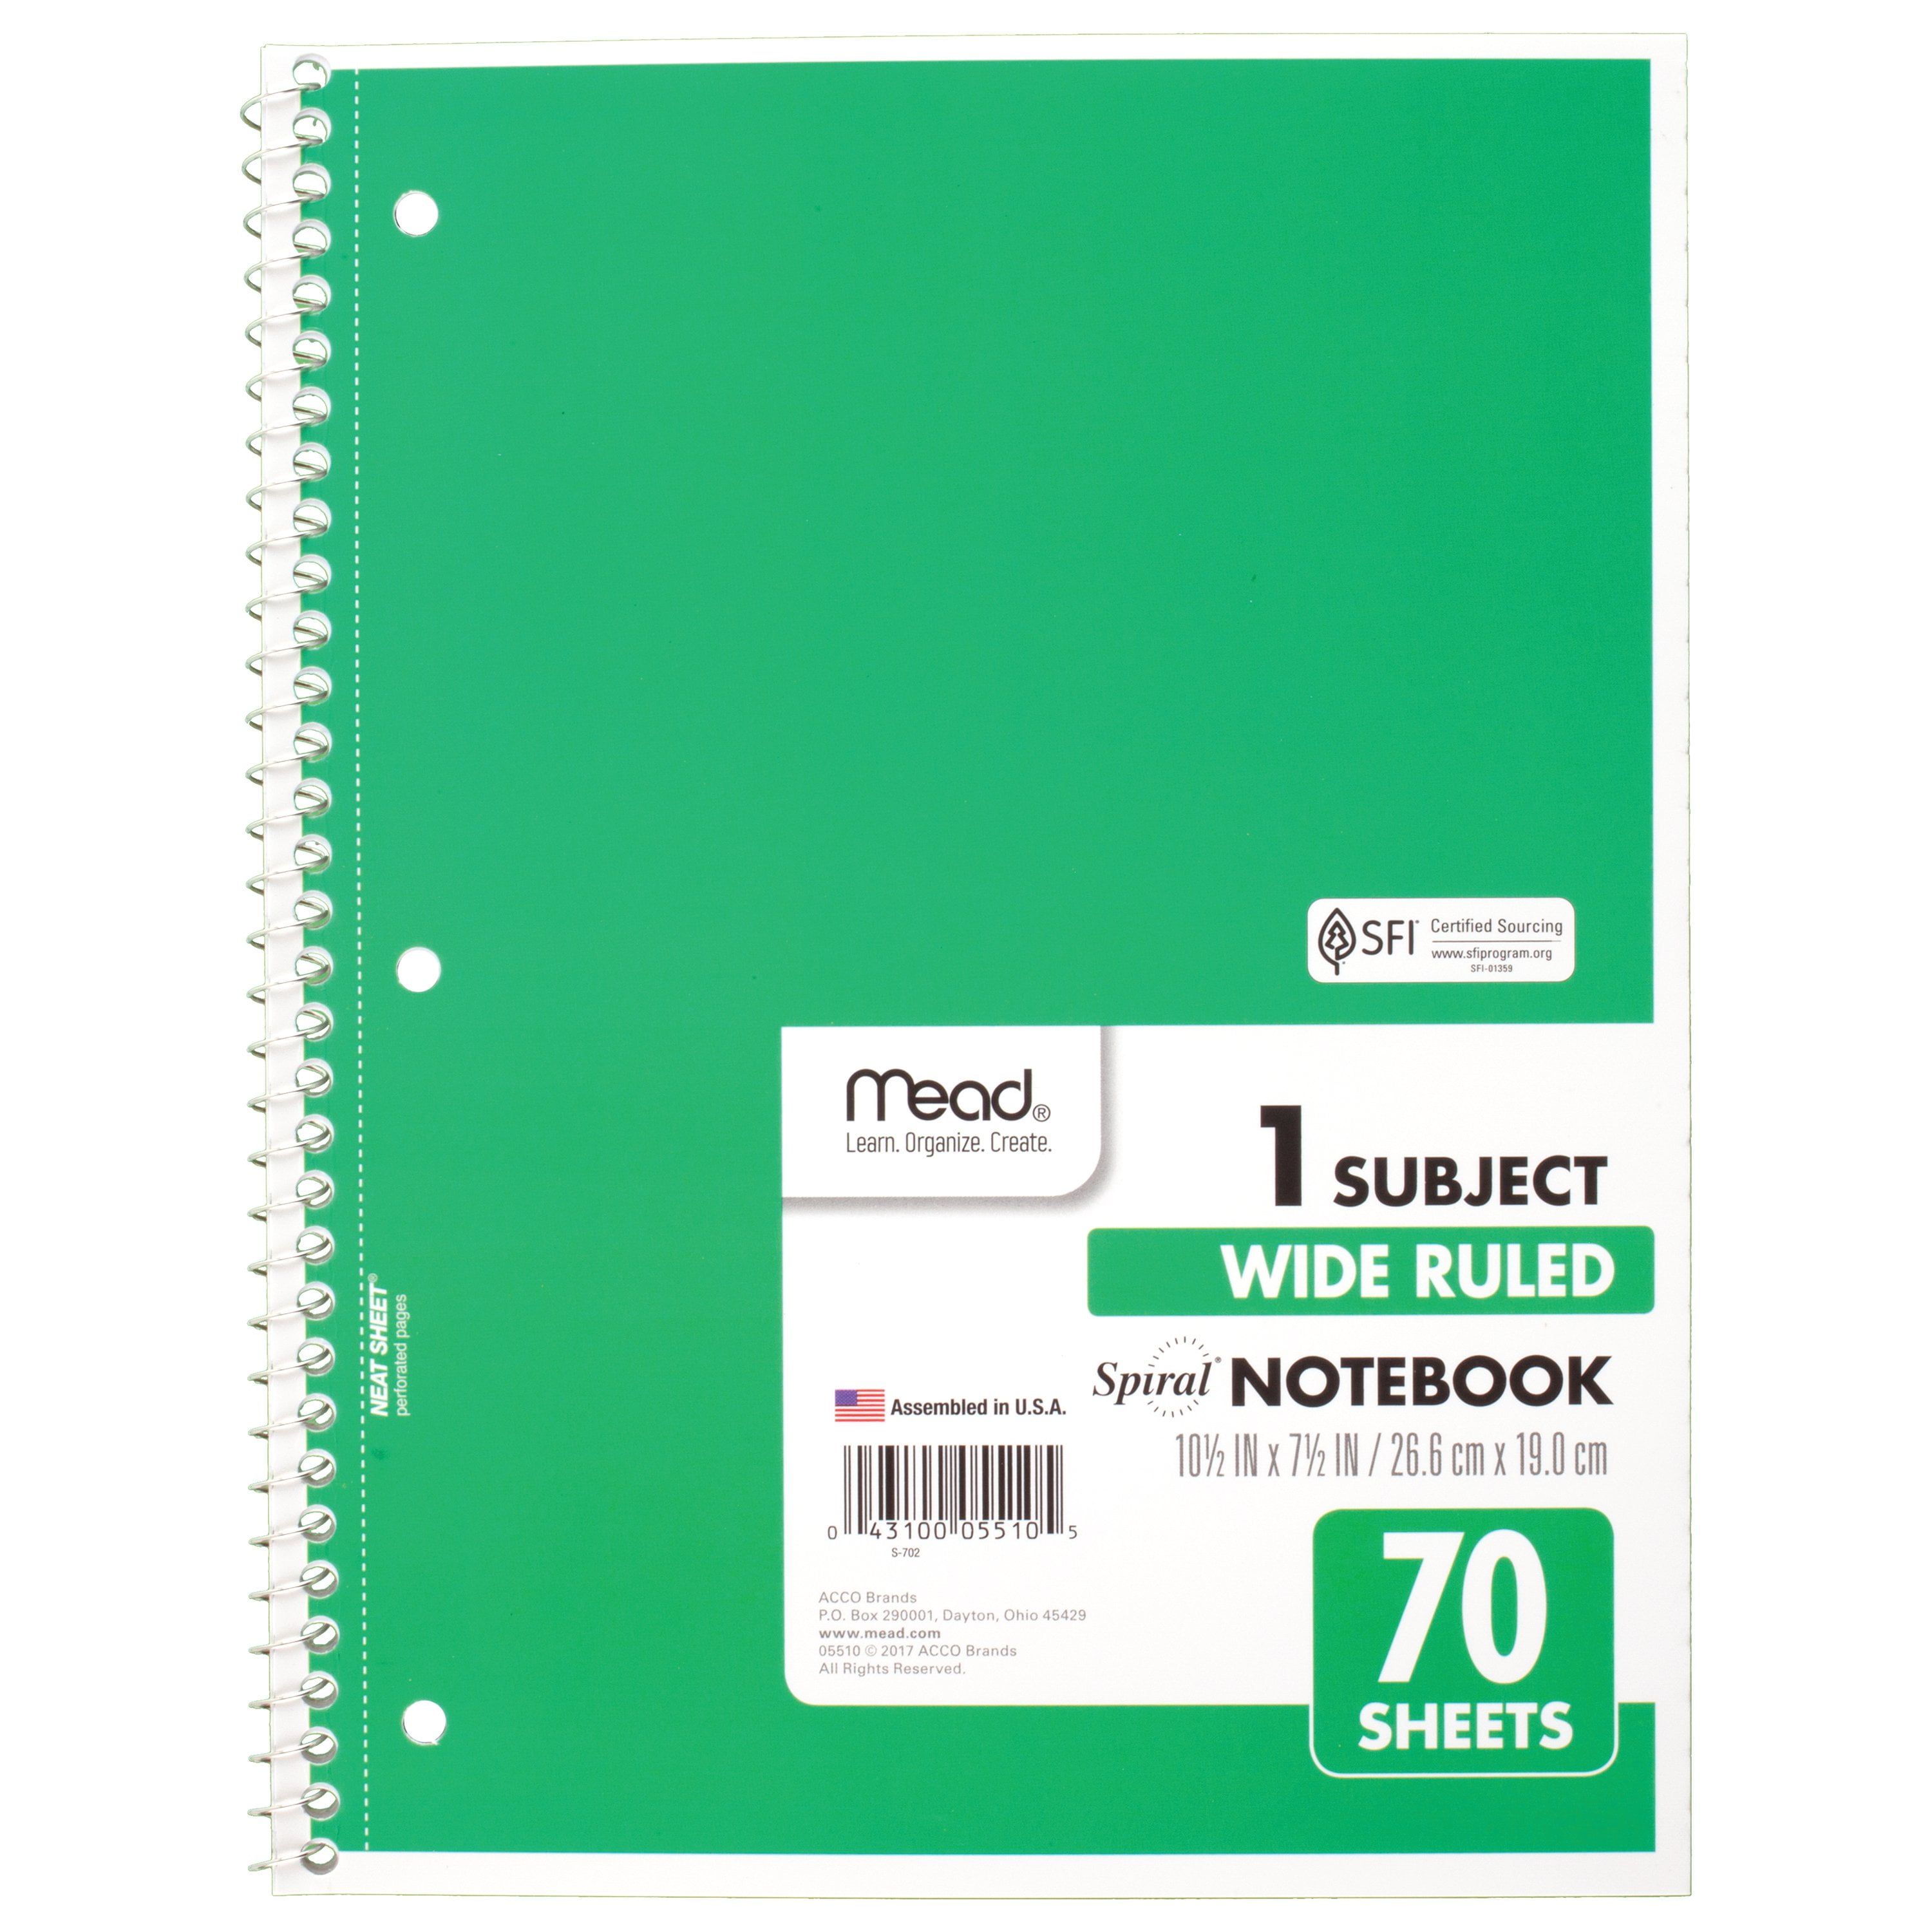 8" X 10.50" 70 Sheet College Ruled Mead 1-subject Wirebound Ruled Notebook 